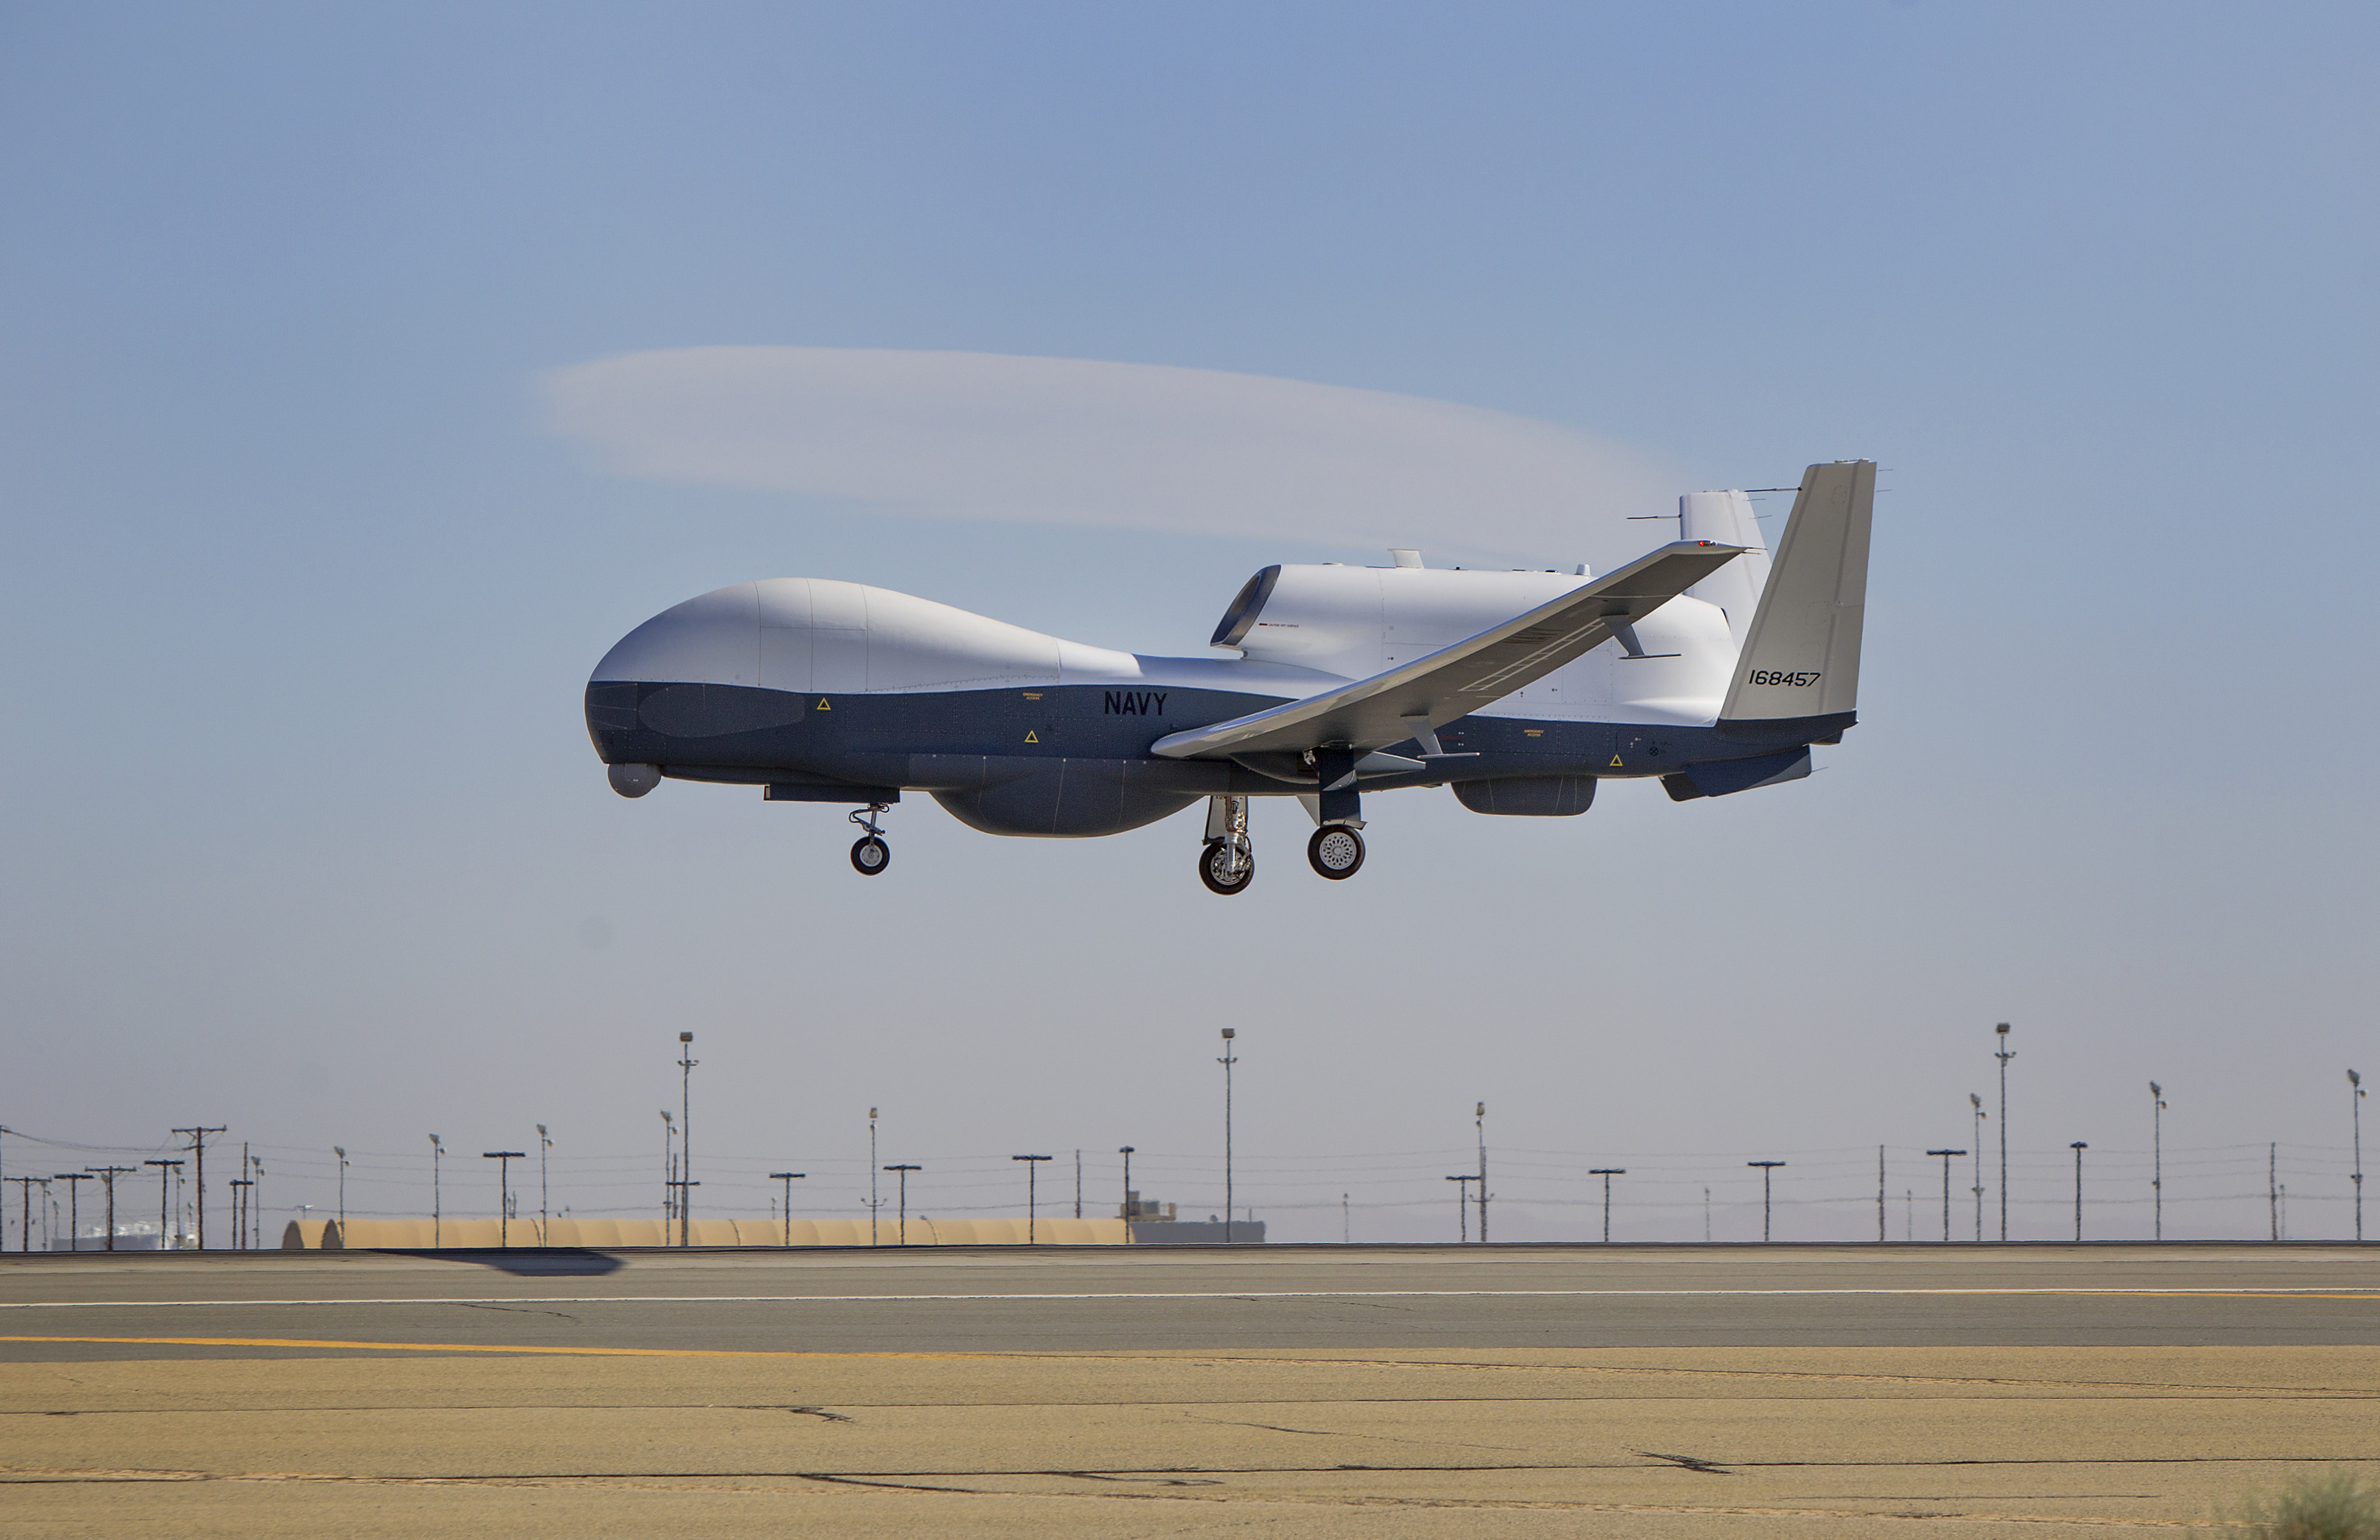 A MQ-4C Triton drone of the type used by the US for surveillance. Photo: US Navy